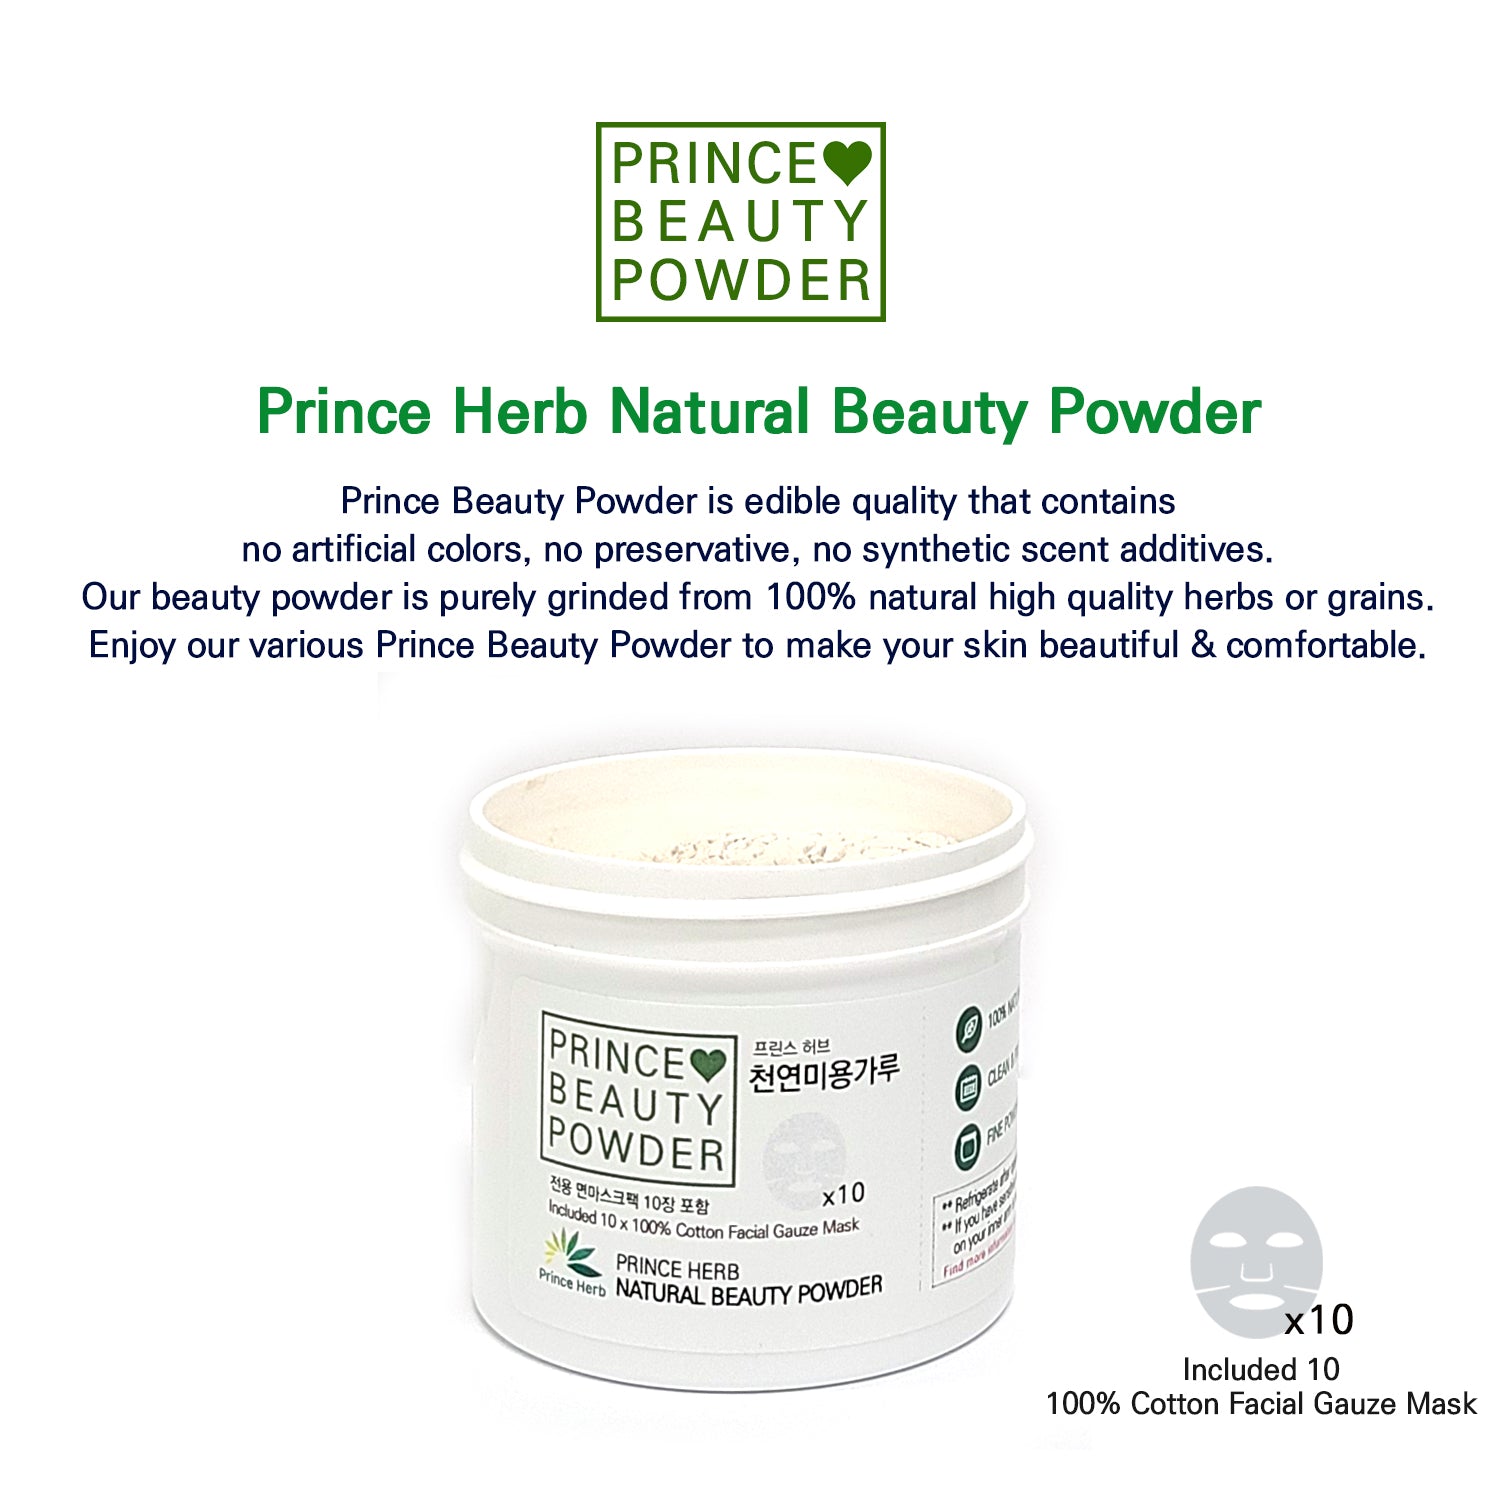 Prince Natural Beauty ELVAN STONE Powder For Facial Mask 한국산 프린스 천 photo picture photo